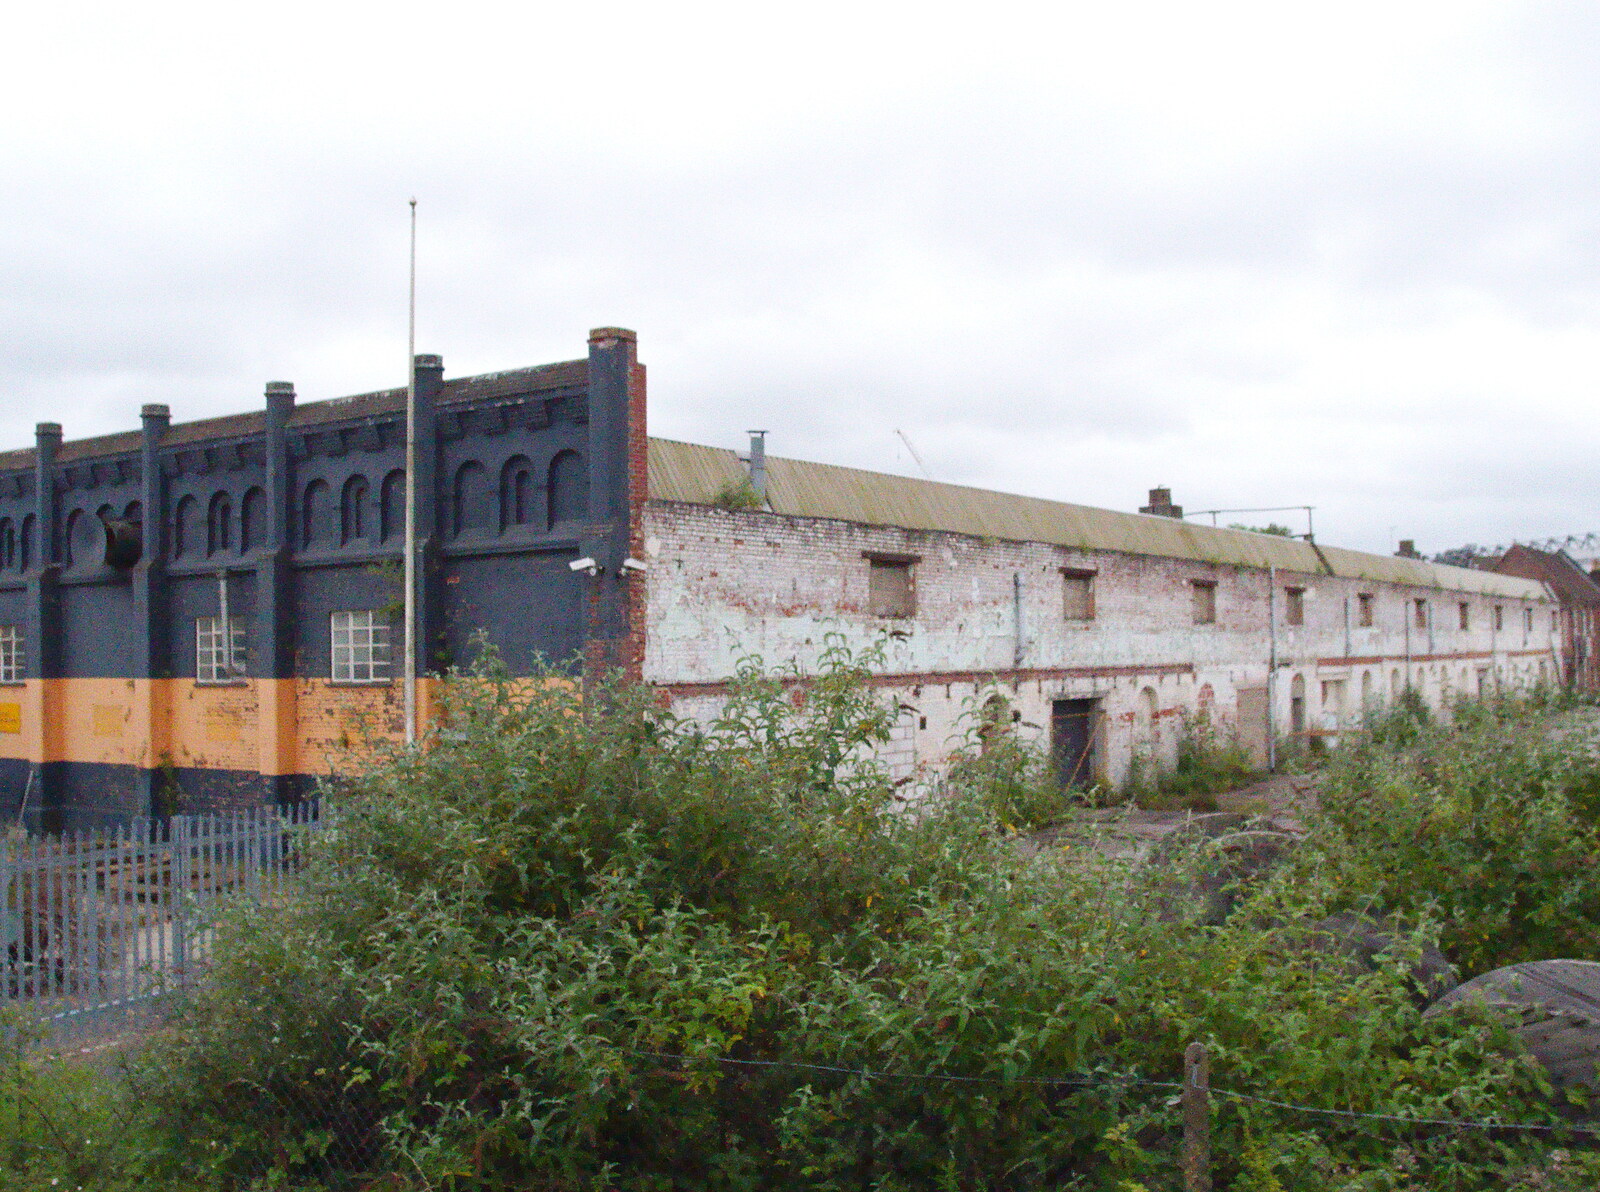 A large derelict warehouse or factory from Railway Hell: A Pantograph Story, Chelmsford, Essex - 17th June 2014